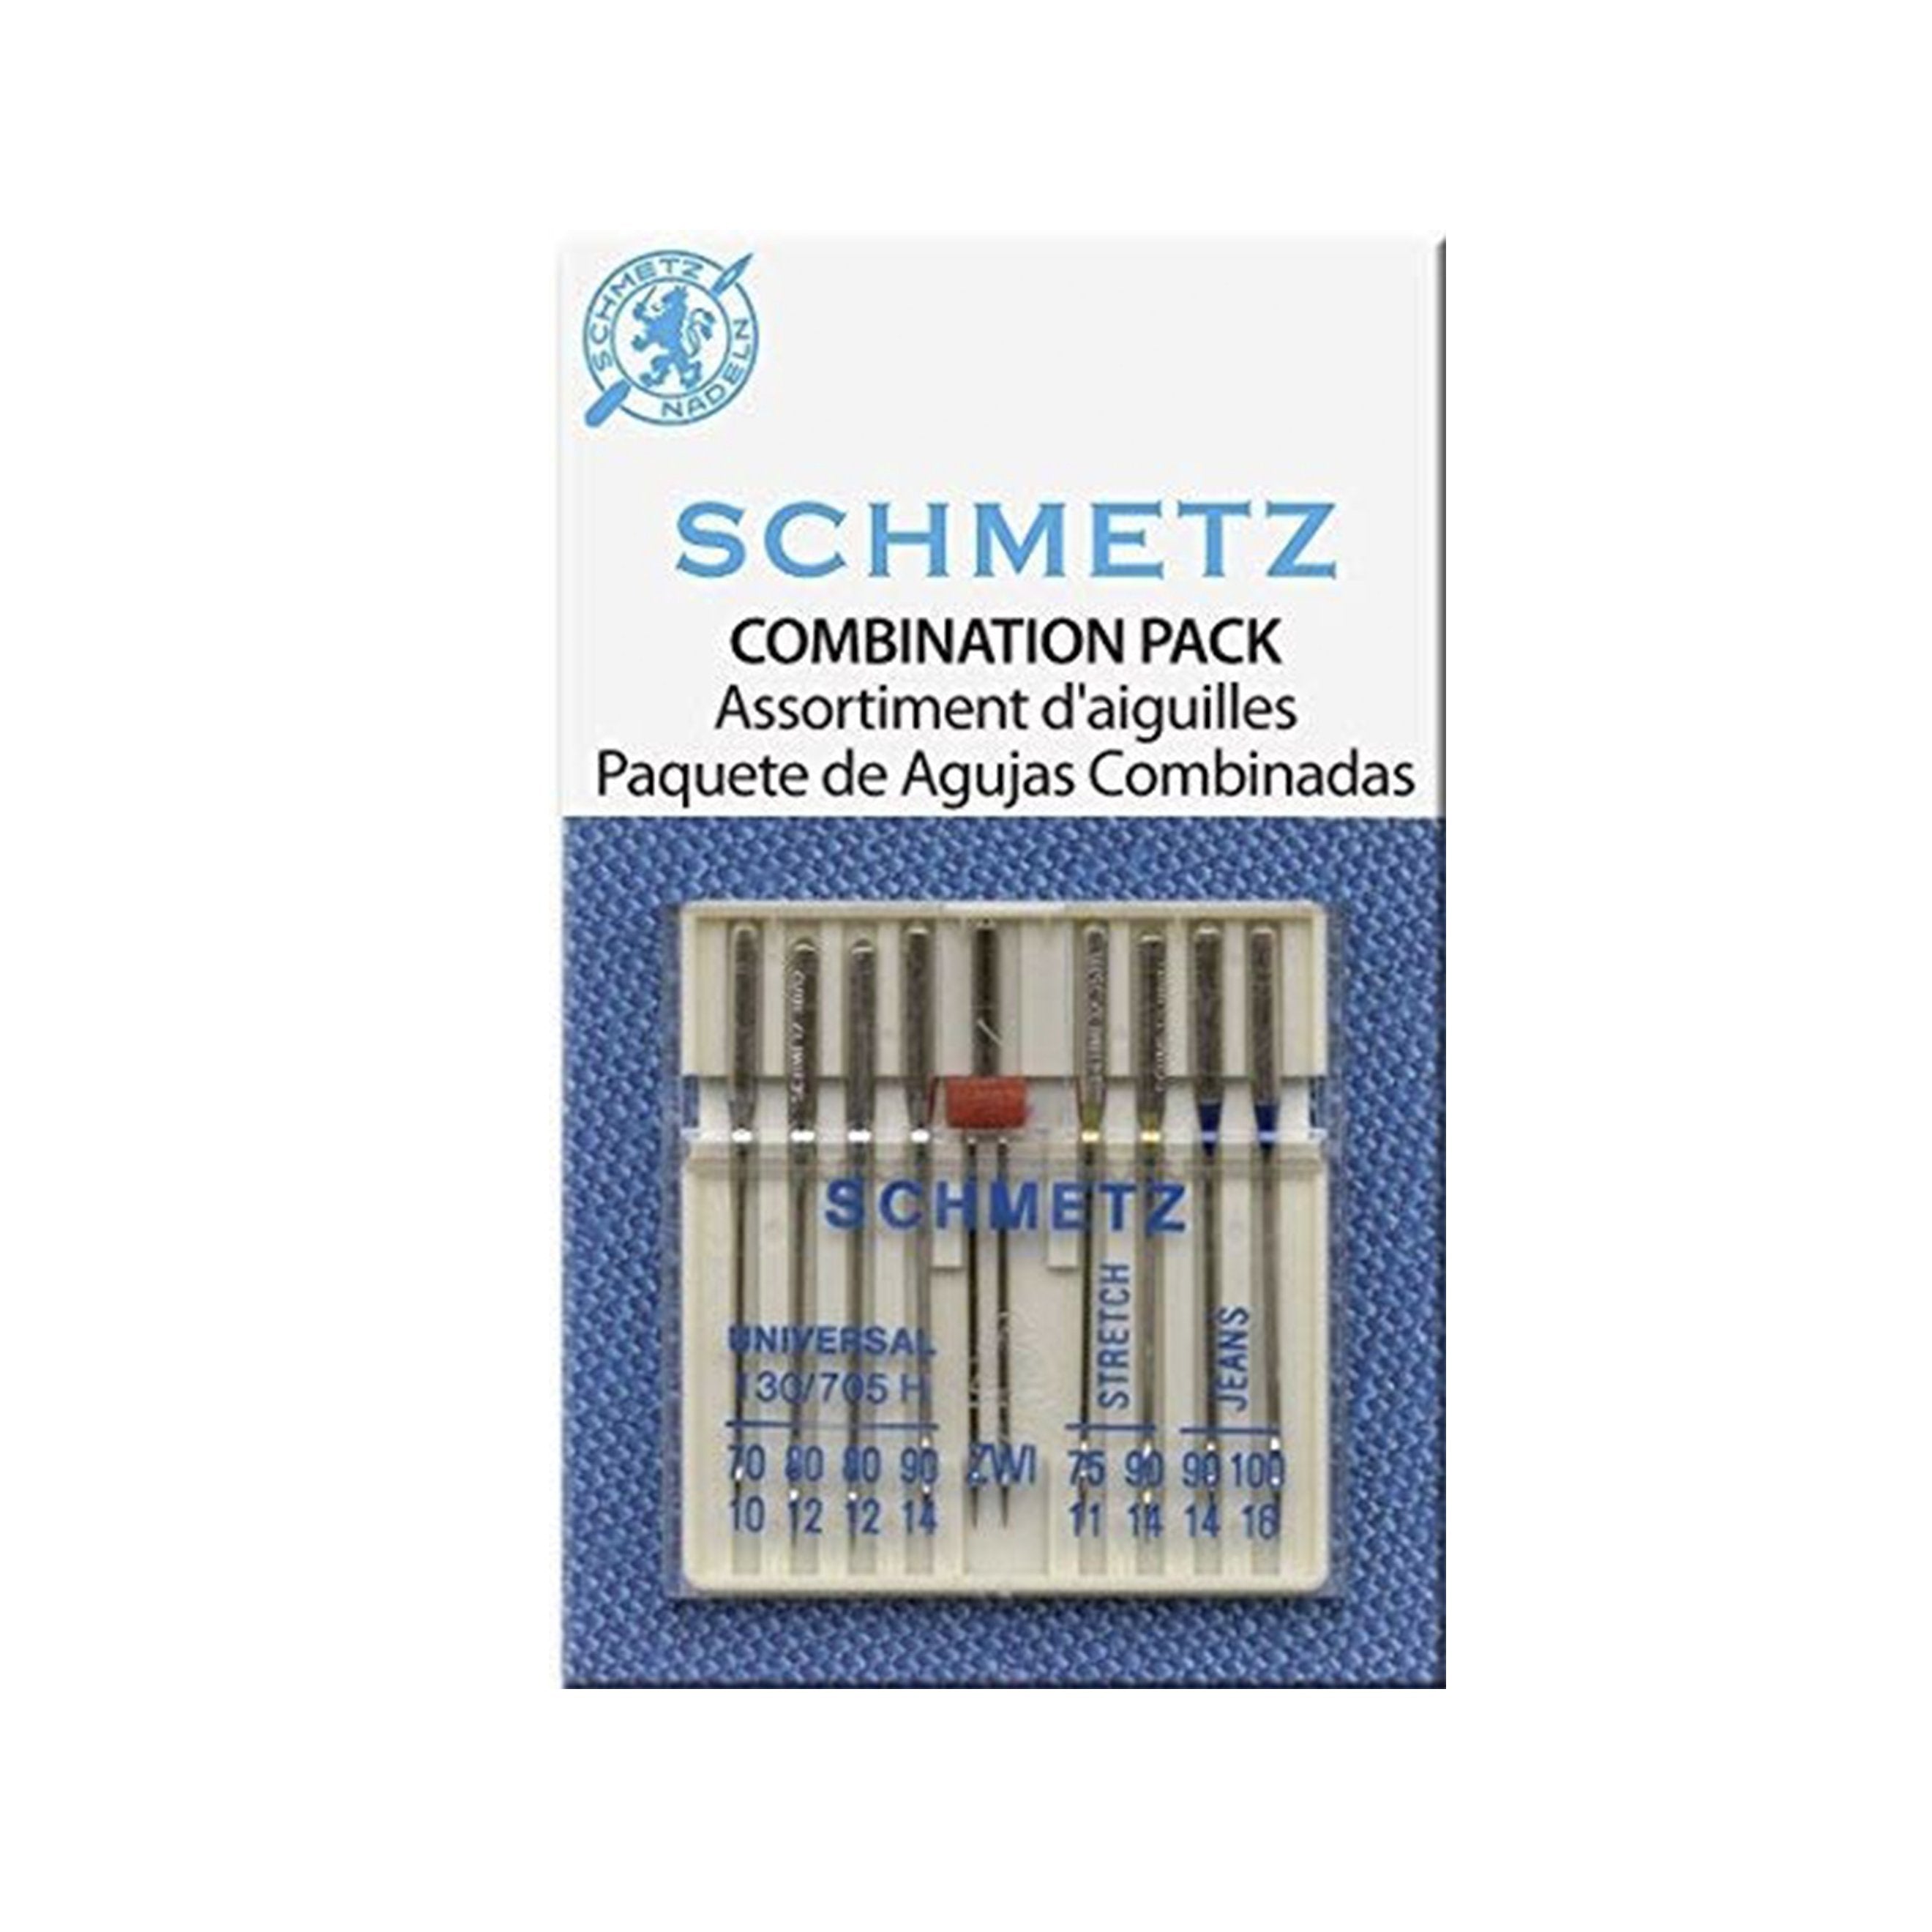 Denim and Universal Sewing Machine Needles Combo Pack, (Size